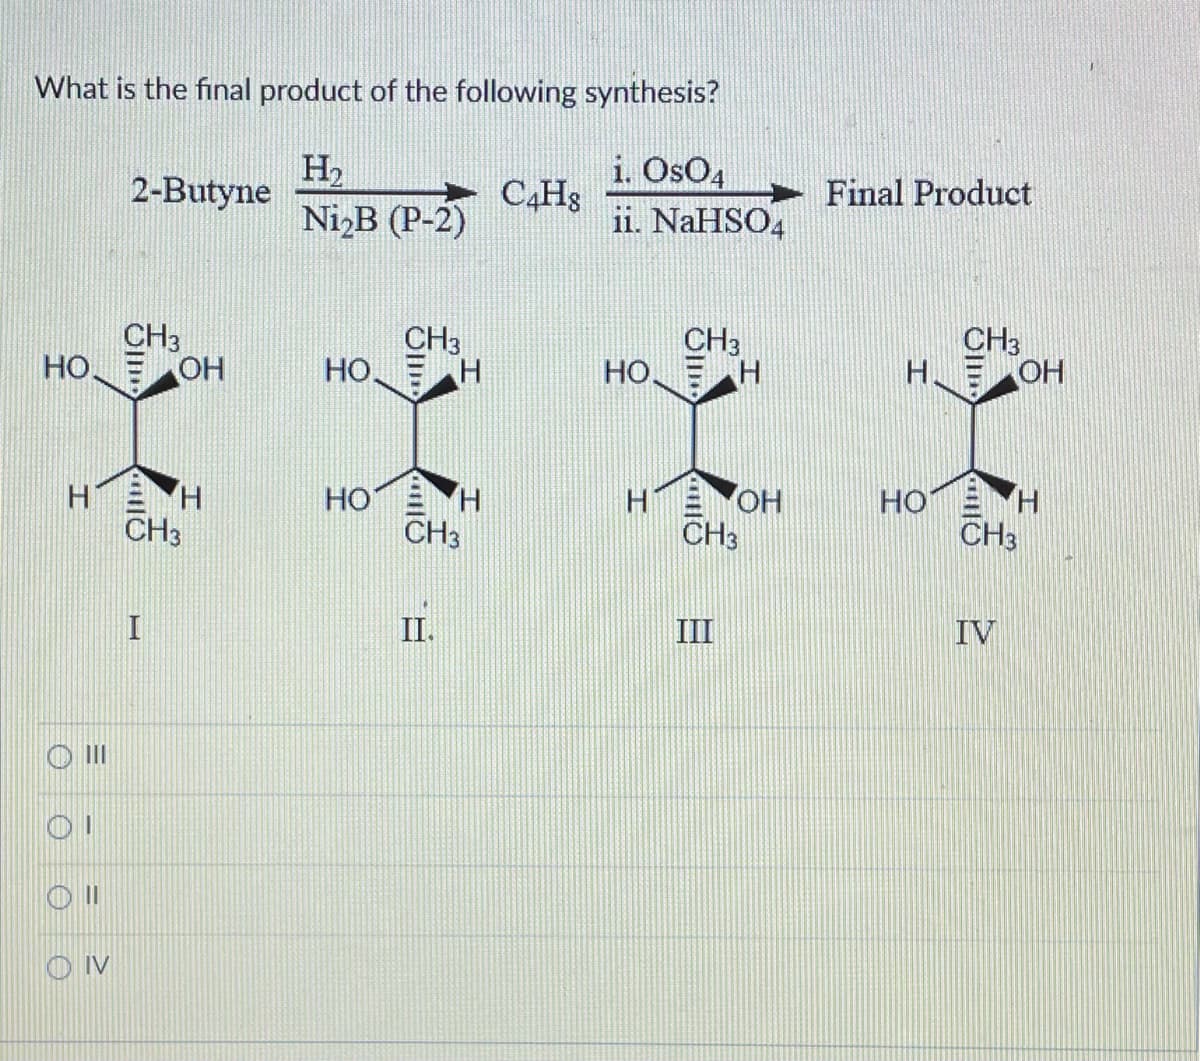 What is the final product of the following synthesis?
i. OsO4
H₂
Ni2B (P-2)
ii. NaHSO4
НО
Н
Ш
ОТ
Oll
OIV
2-Butyne
CH3
ОН
I
Н
CH3
CH3
НО Е Н
НО
н
CH3
C Hig
НО.
CH3
Н
HOH
CH3
Final Product
Н.
НО
CH3
ОН
IV
H
CH3